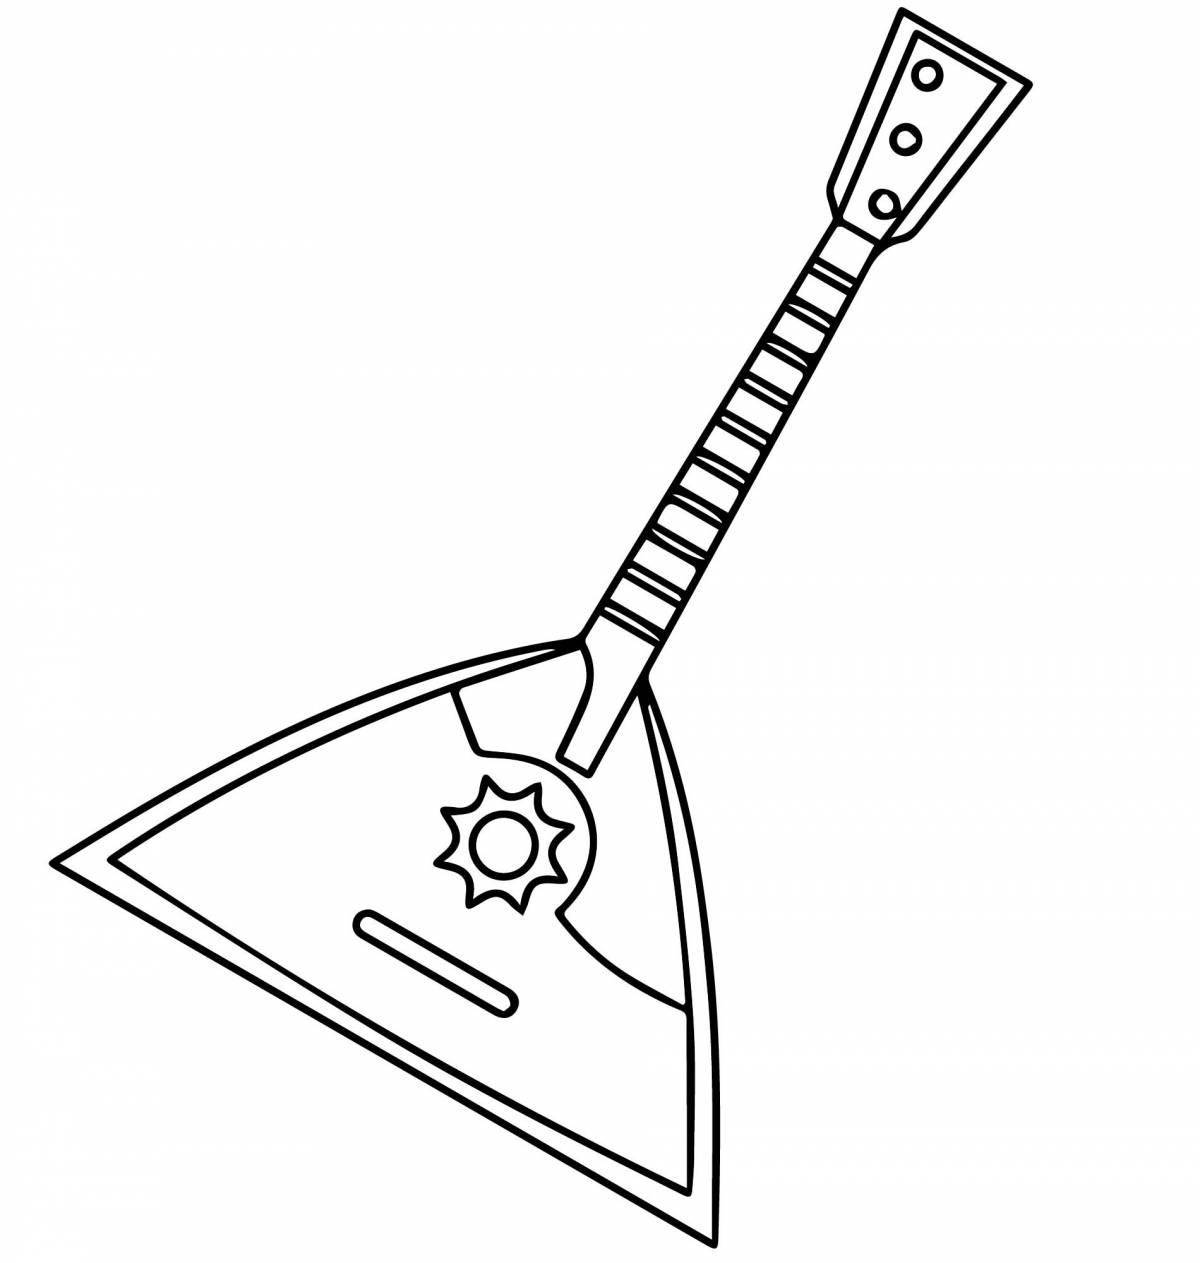 Impressive Russian folk musical instruments coloring page